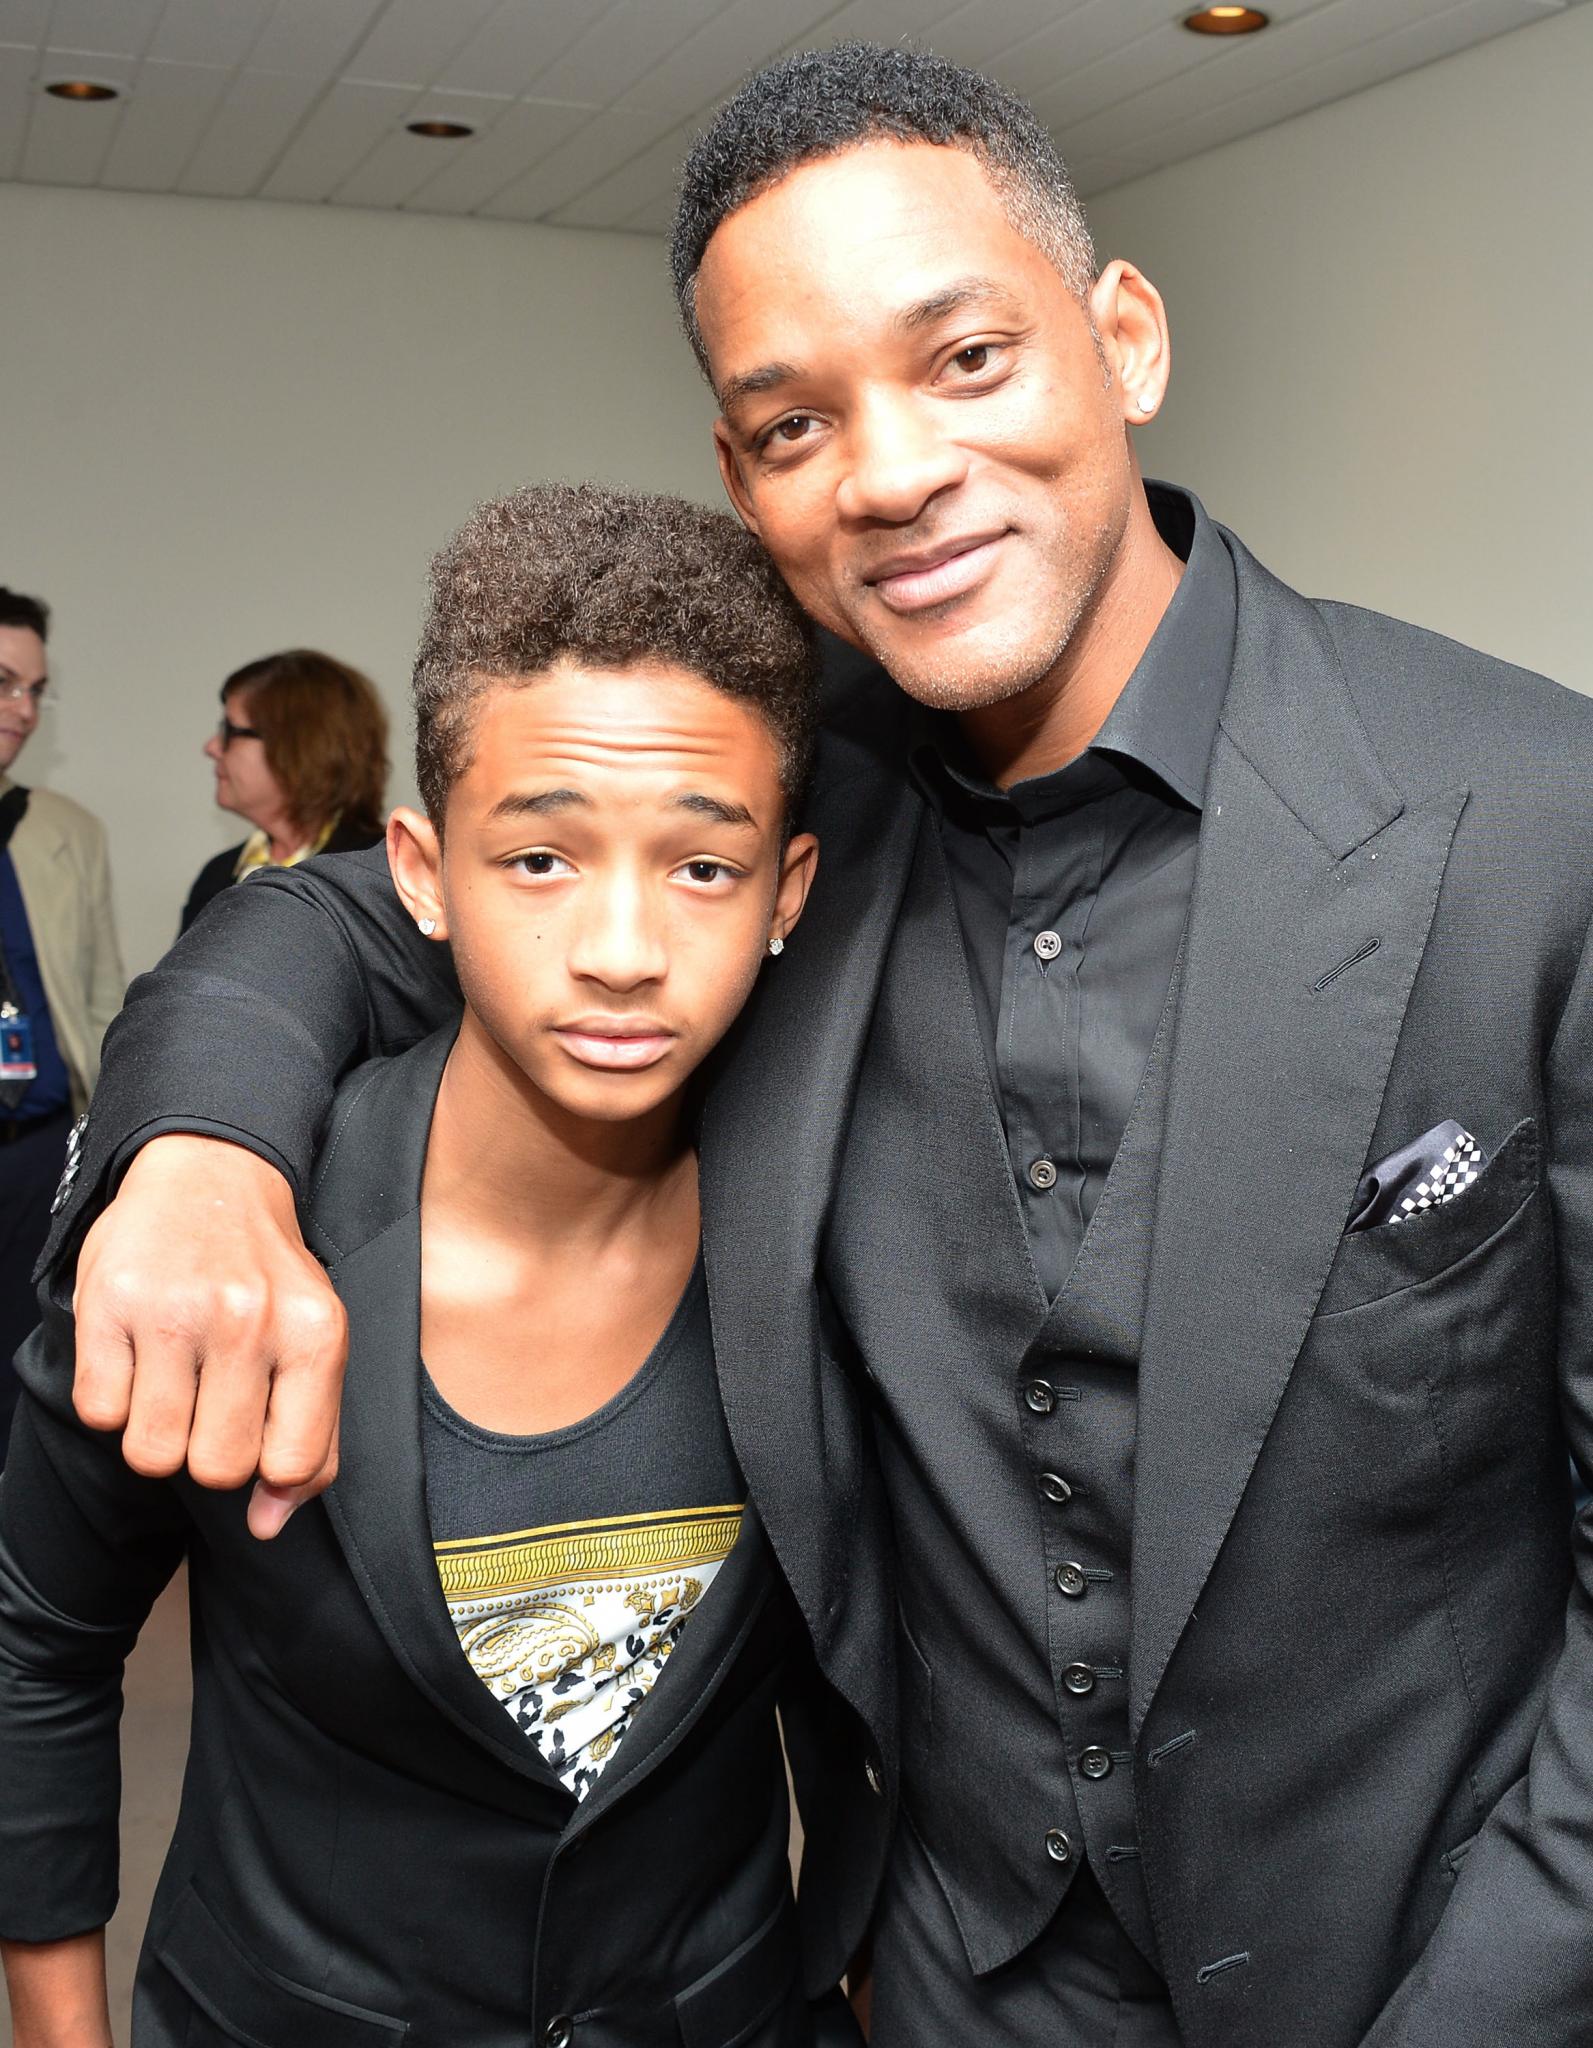 Jaden Smith: What is an emancipated minor?